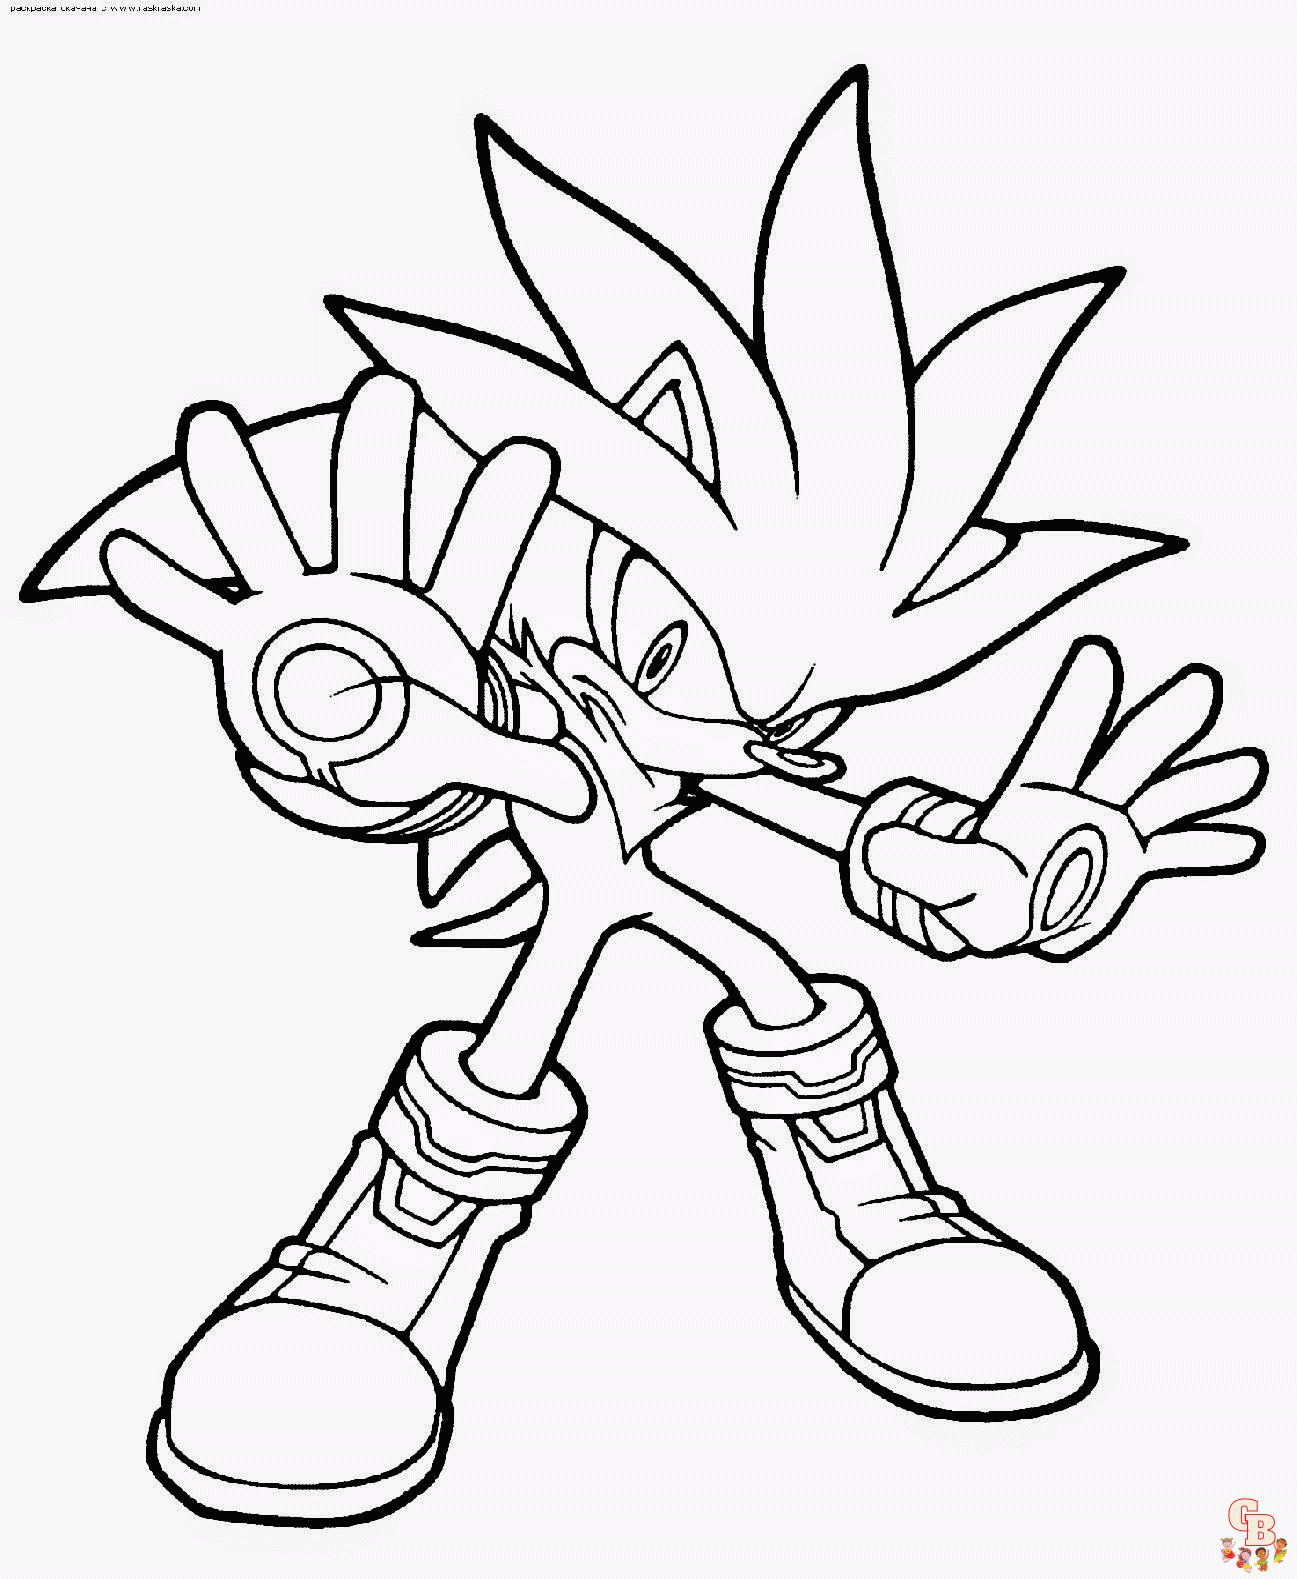 Get Creative with Free Printable Shadow Sonic Coloring Pages